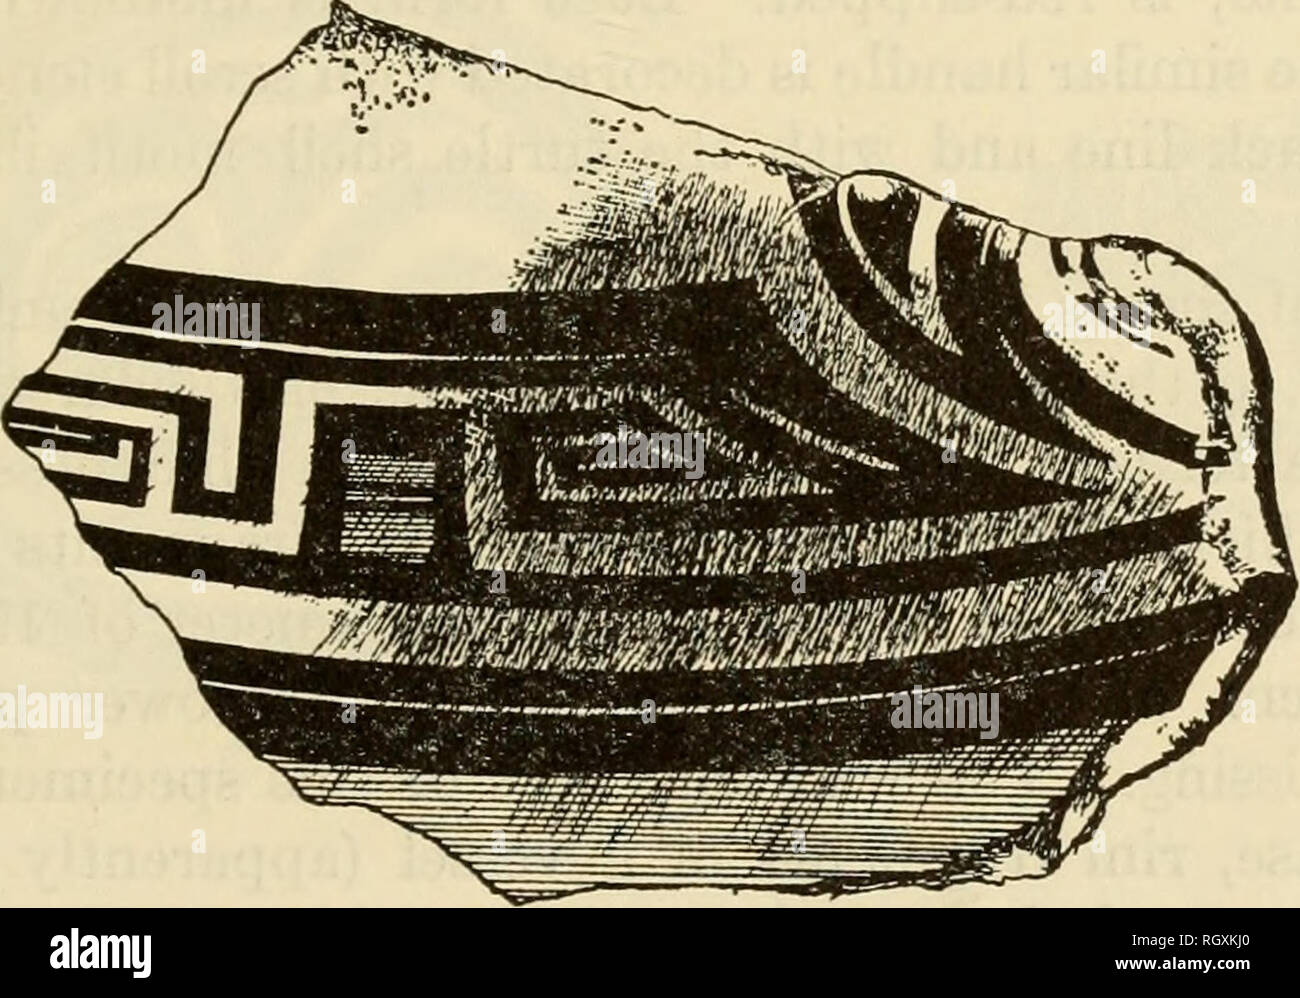 . Bulletin. Ethnology. Figure 28.—Parita type, Ortiga variety, Mound III sherds. indicate red. Horizontal lines complete vessels were present in the Peabody collection, it is probable that they were similar to specimens illustrated by Holmes and also by Lothrop, in which the body is shaped somewhat like a fat pear with a rounded, unmodified base (Holmes, 1888, figs. 207-8; Lothrop, 1942, figs. 483-4). Holmes also illustrates a vessel of this variety with a high, slightly flared collar and a ring base. High collars- 693-817—64 7. Please note that these images are extracted from scanned page ima Stock Photo